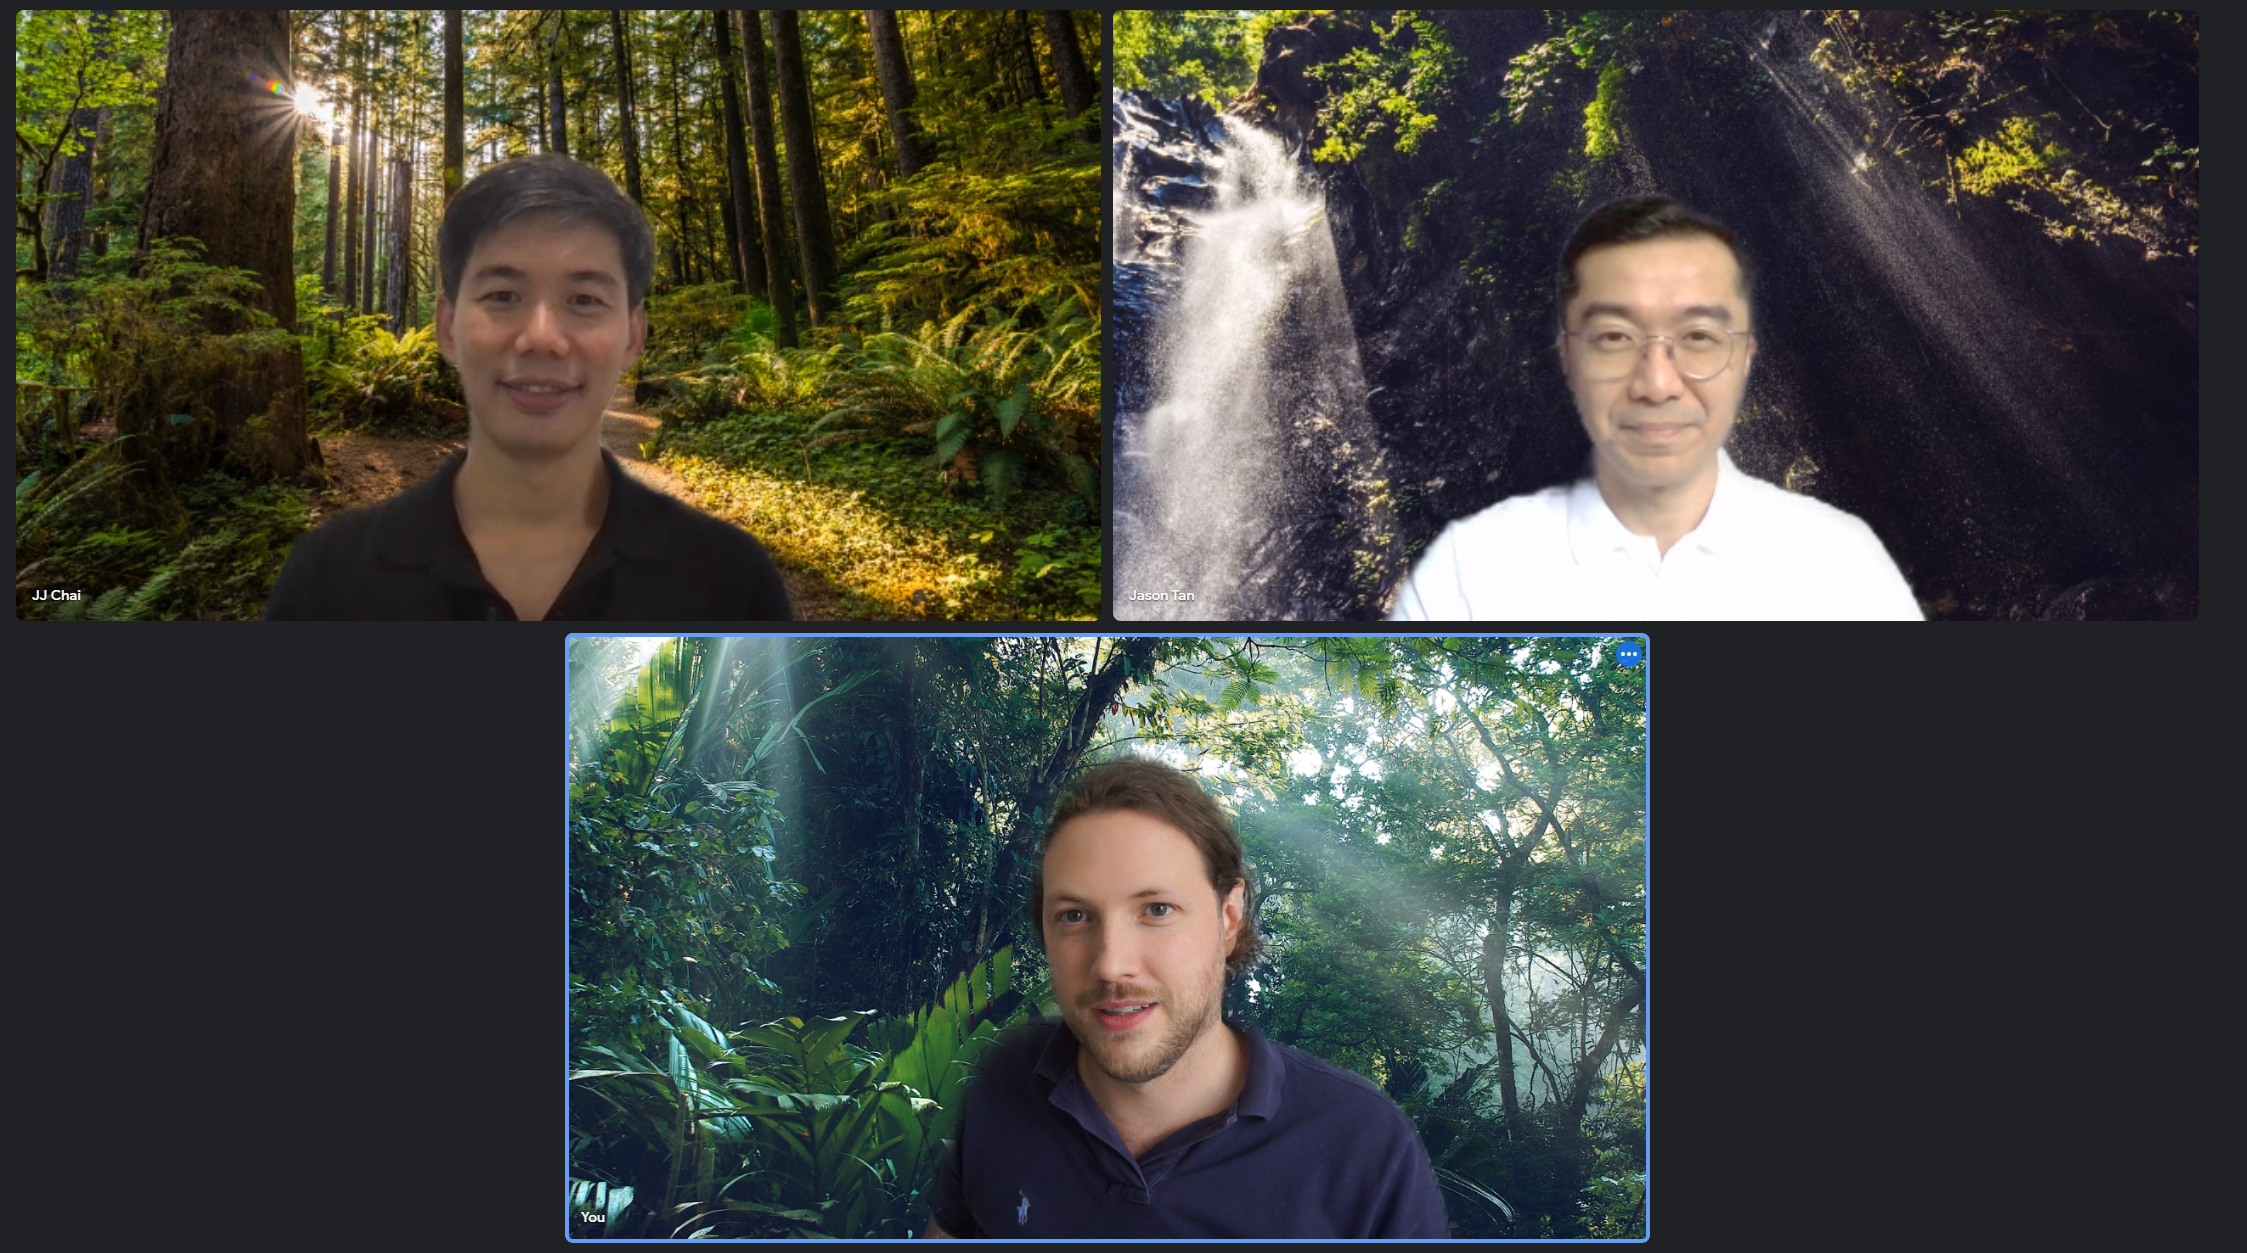 The founding team of Rainforest hasn’t been able to meet in the same office since day one. Clockwise from top left: JJ Chai, co-founder and CEO; Jason Tan, co-founder and CFO; and Per-Ola Röst, co-Founder and CTO. Photo courtesy of Rainforest.